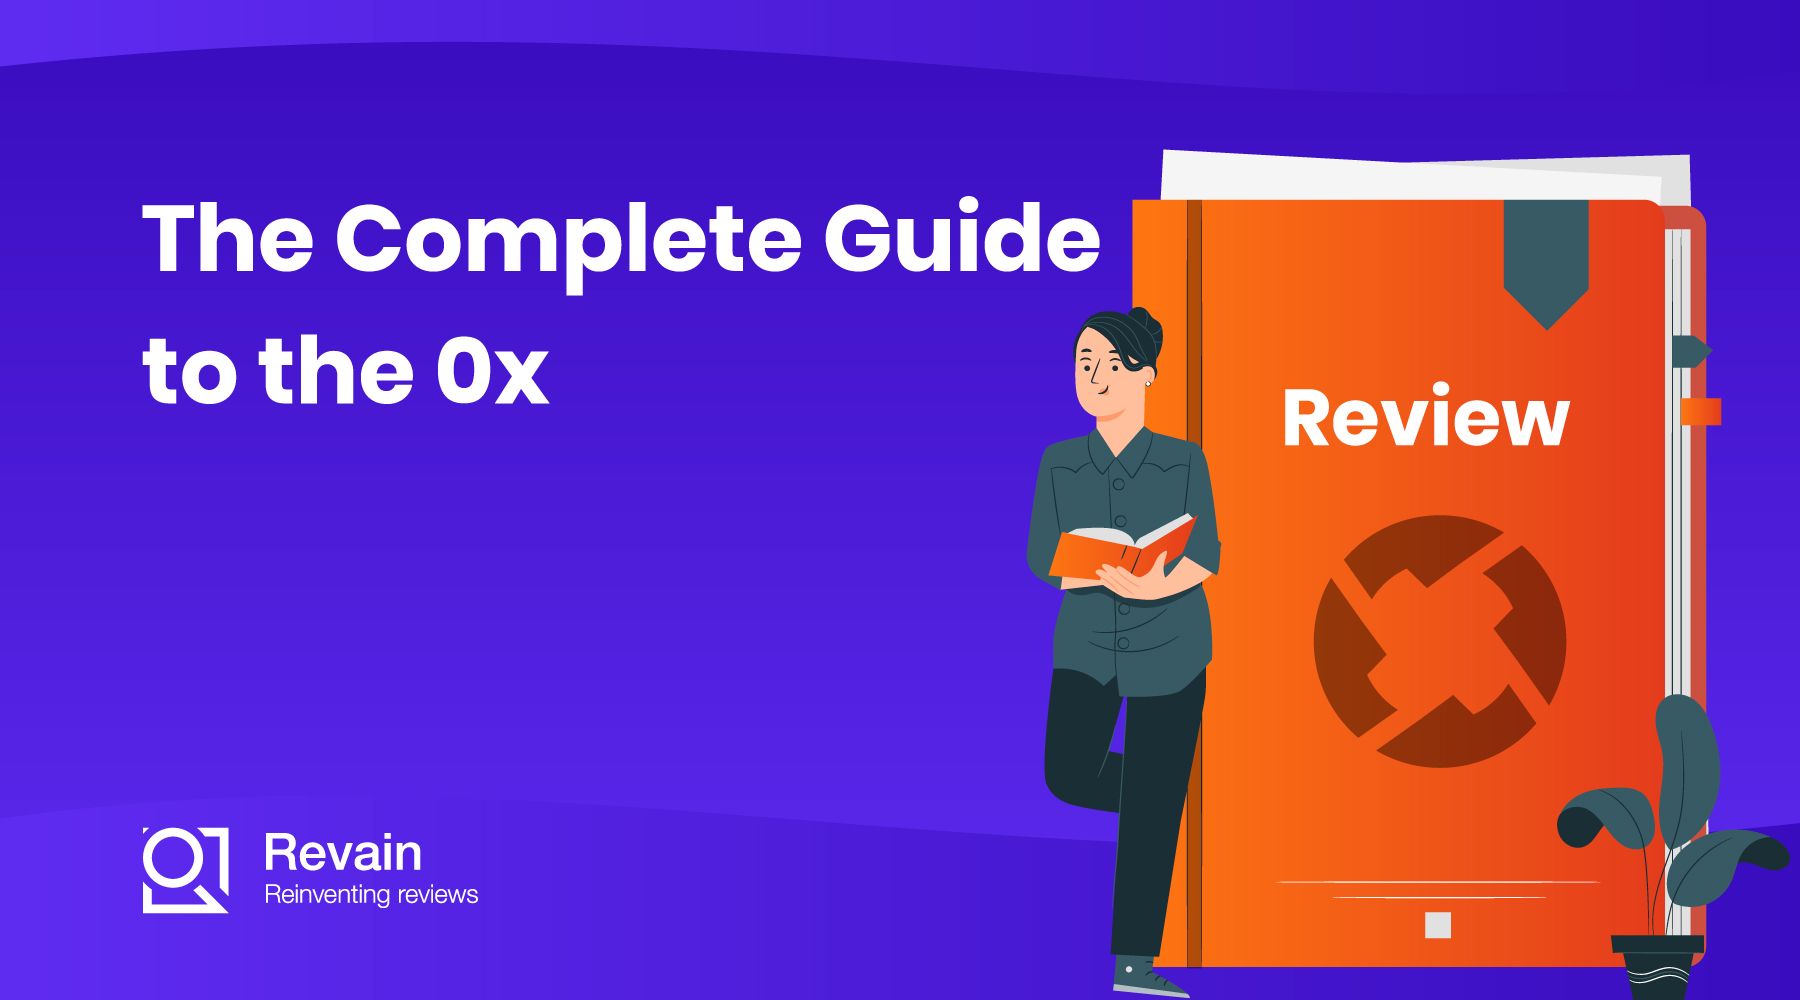 The Complete Guide to the 0x